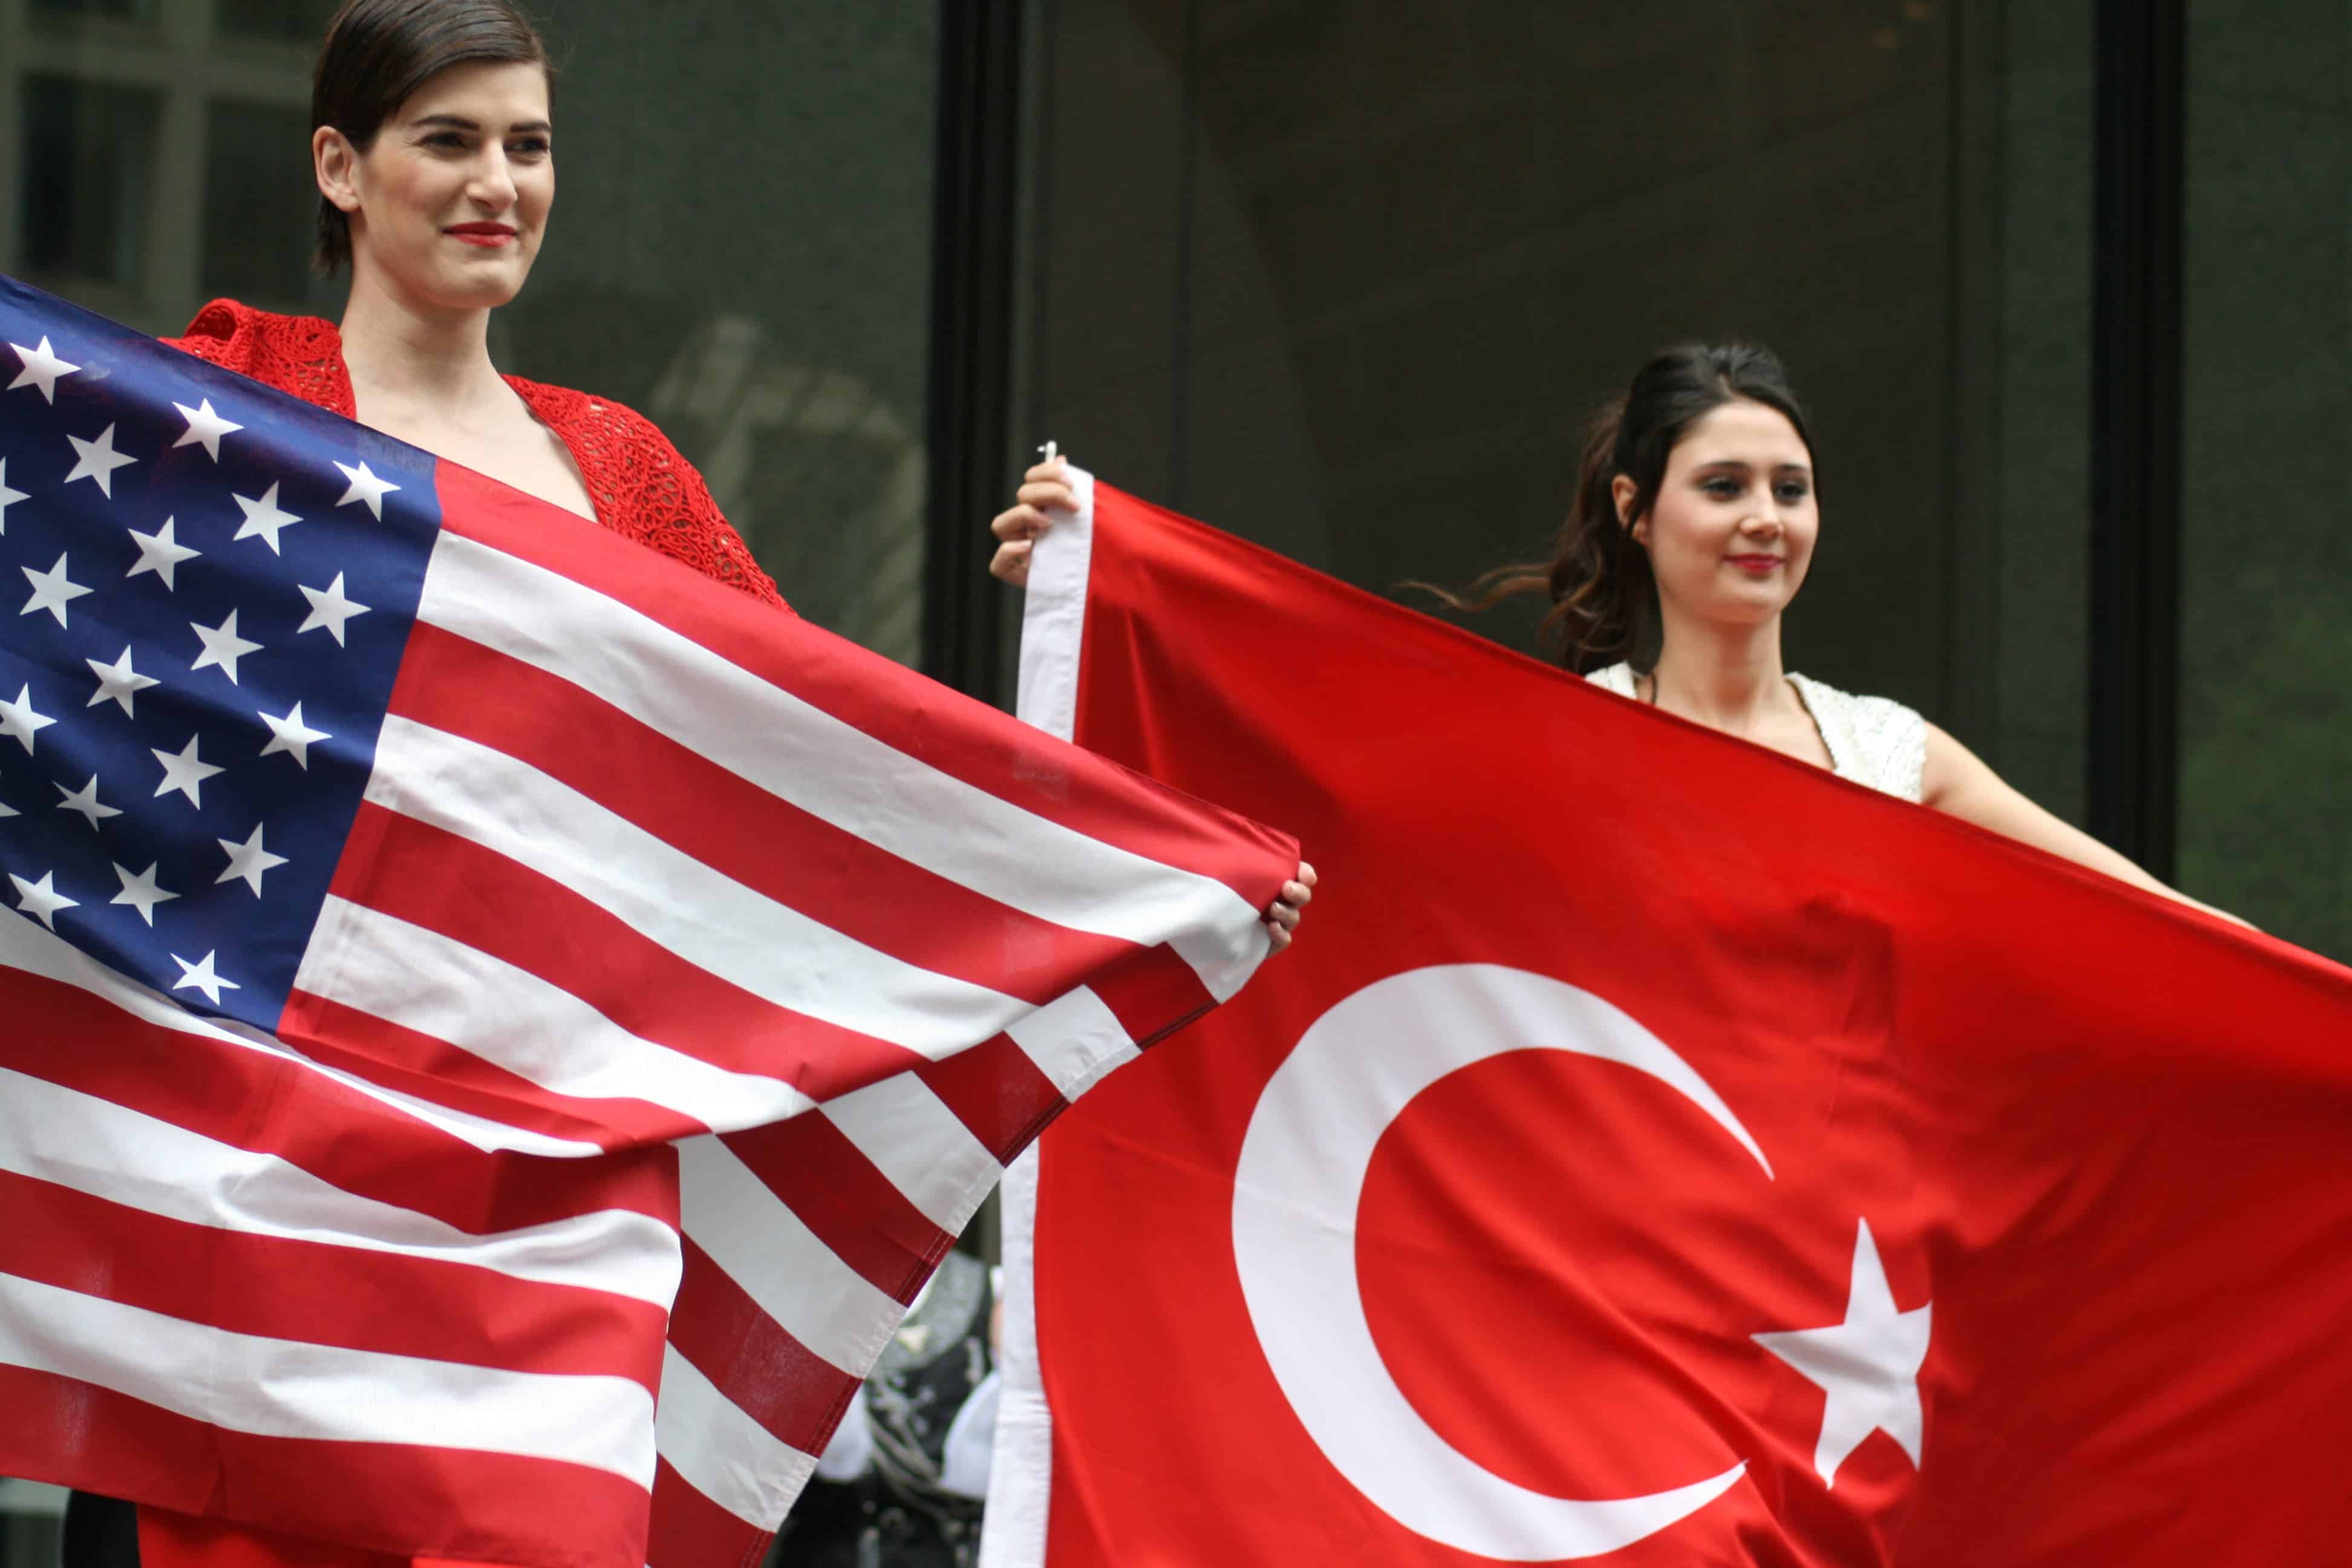 There are some unfortunate similarities between Turkey and the US in this aspect. Image credits: Quinn Anne / Wiki Commons.